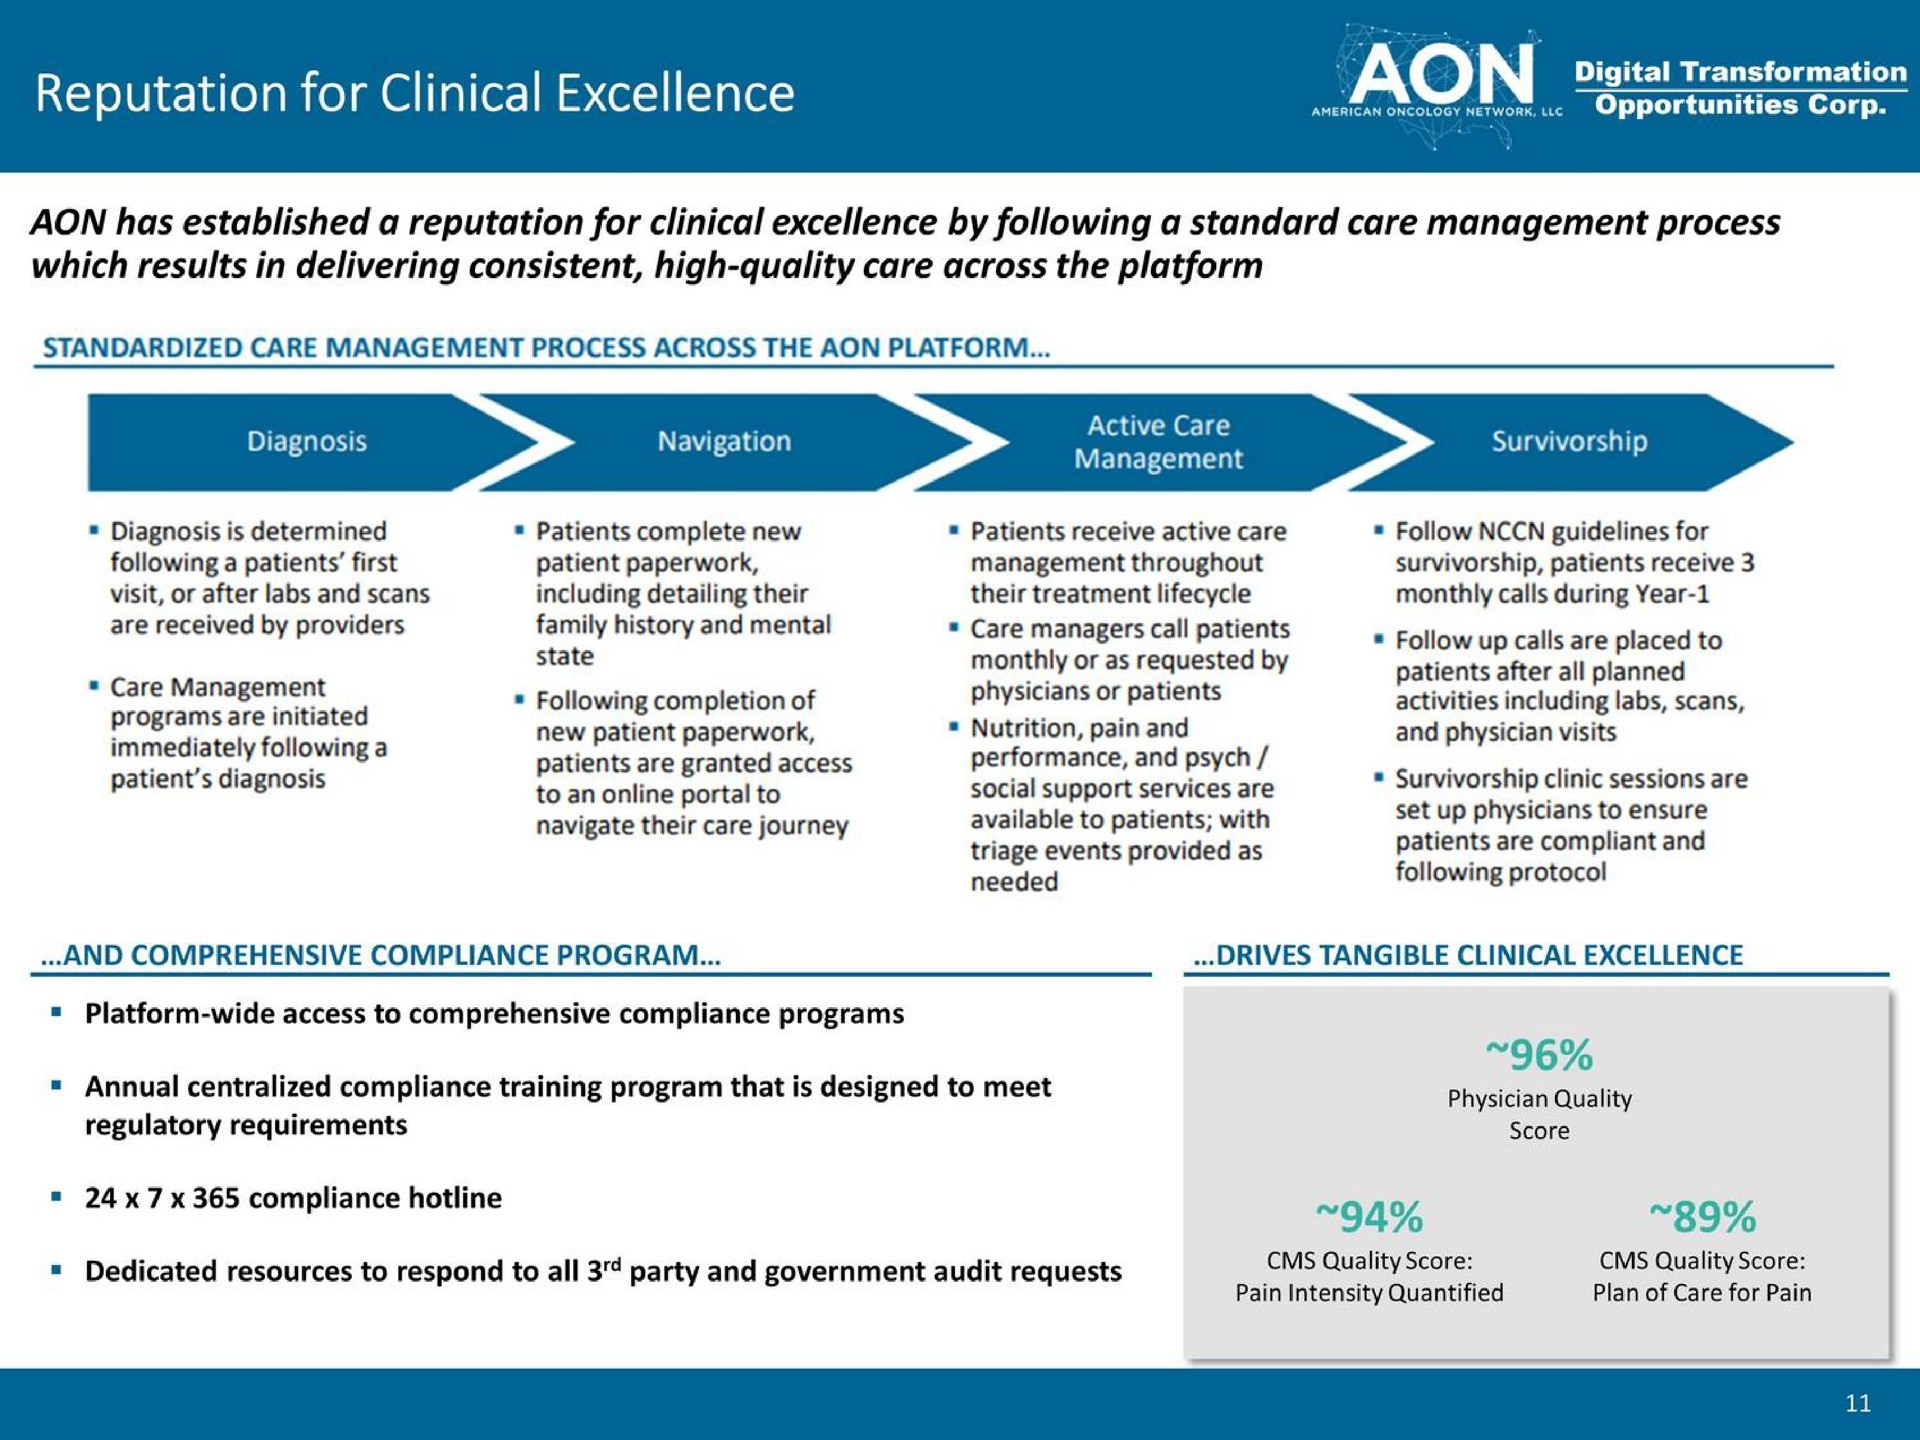 reputation for clinical excellence opportunities corp has established a reputation for clinical excellence by following a standard care management process which results in delivering consistent high quality care across the platform a dedicated resources to respond to all party and government audit requests quality score quality score | American Oncology Network